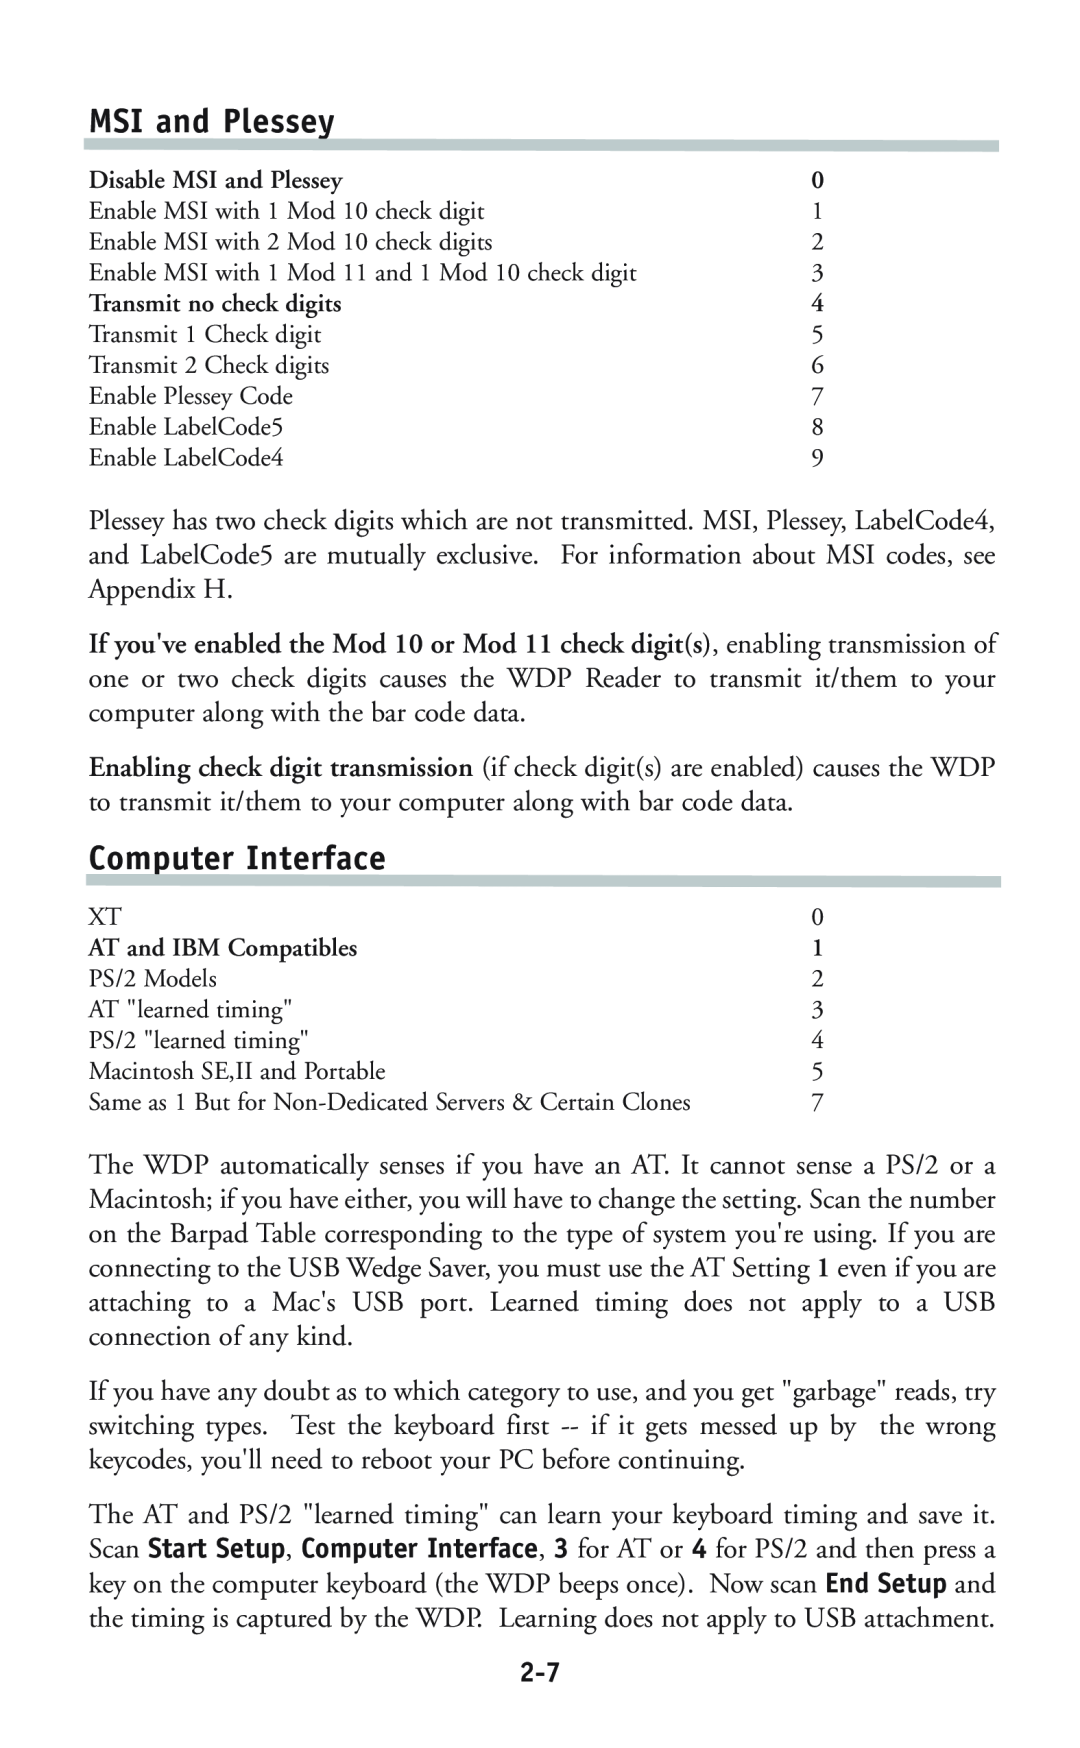 Worth Data P11/12 Computer Interface, Disable MSI and Plessey, Transmit no check digits, AT and IBM Compatibles 